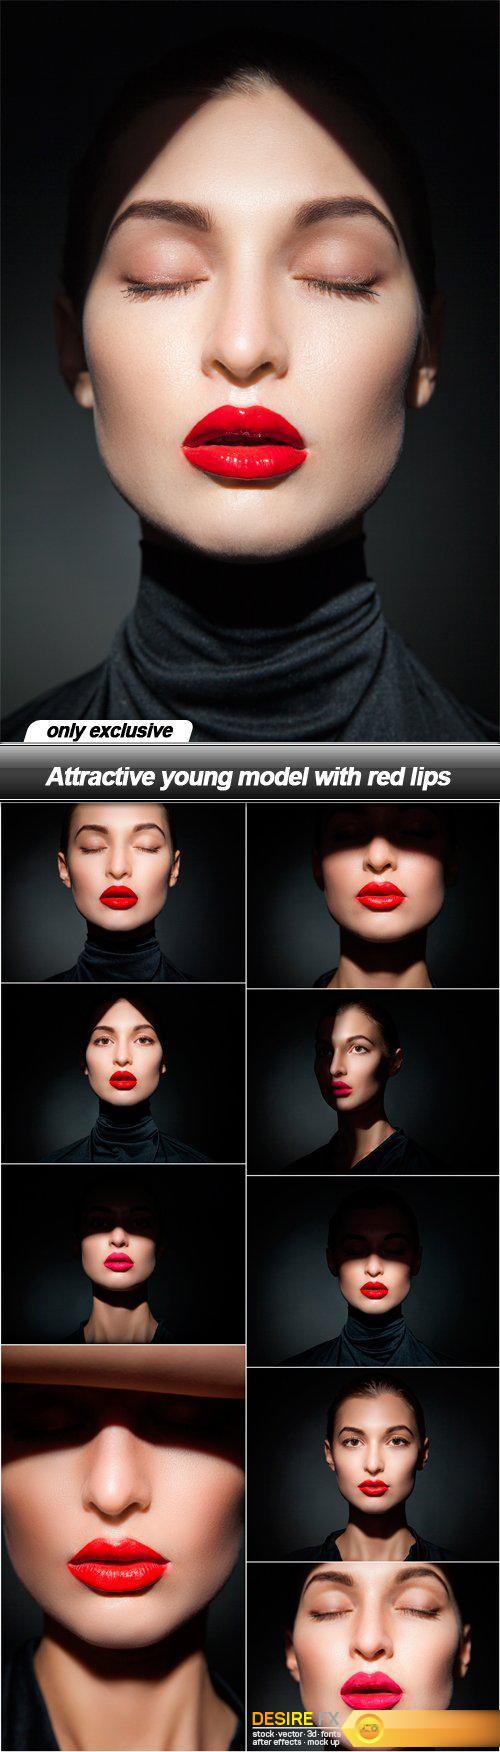 Attractive young model with red lips - 10 UHQ JPEG